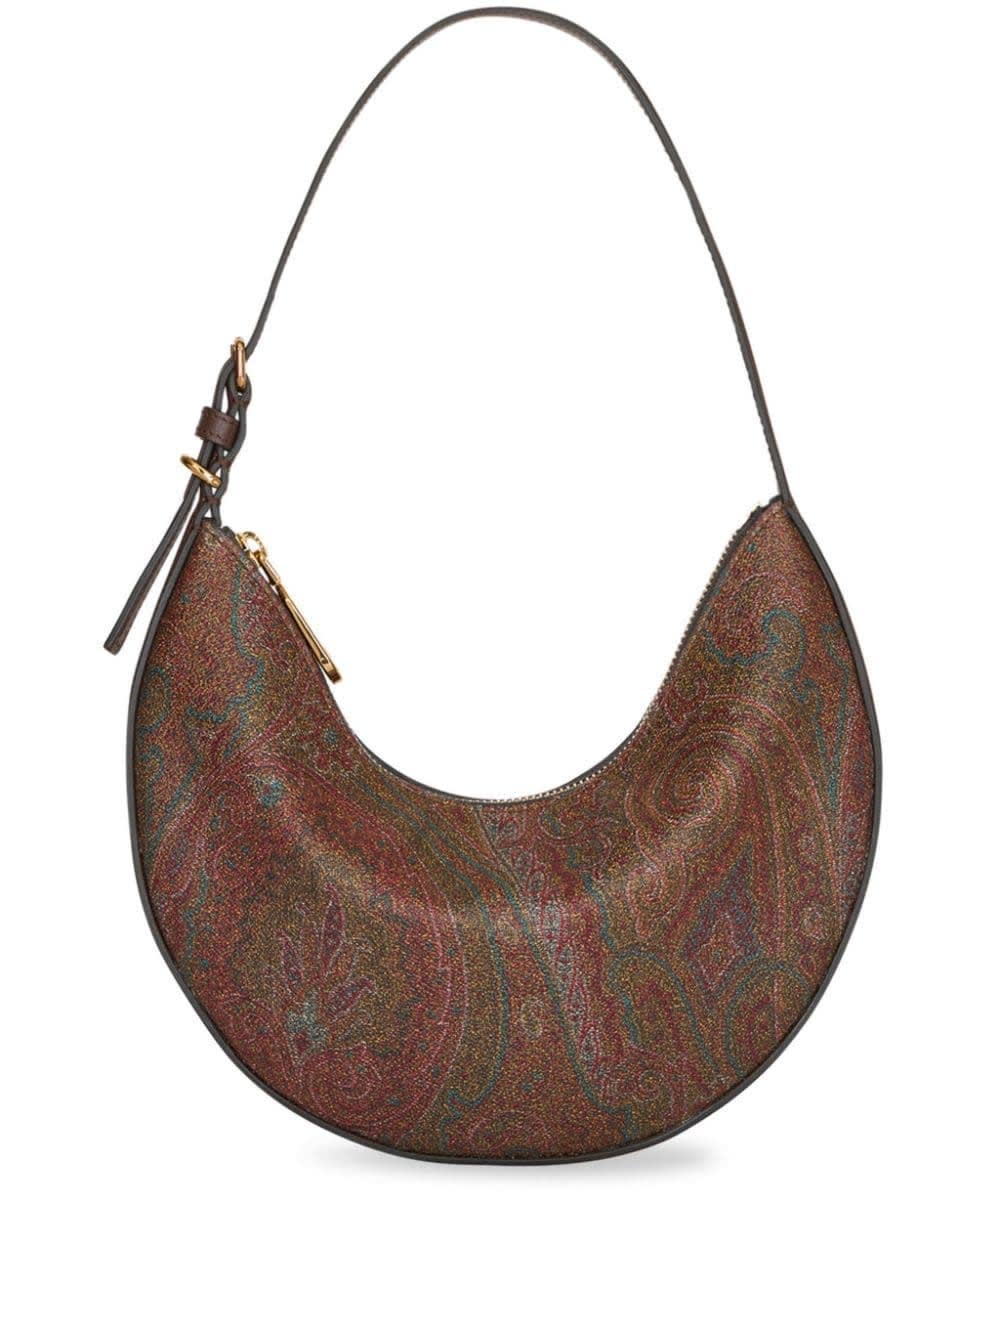 Etro Small Essential Hobo Bag In Brown